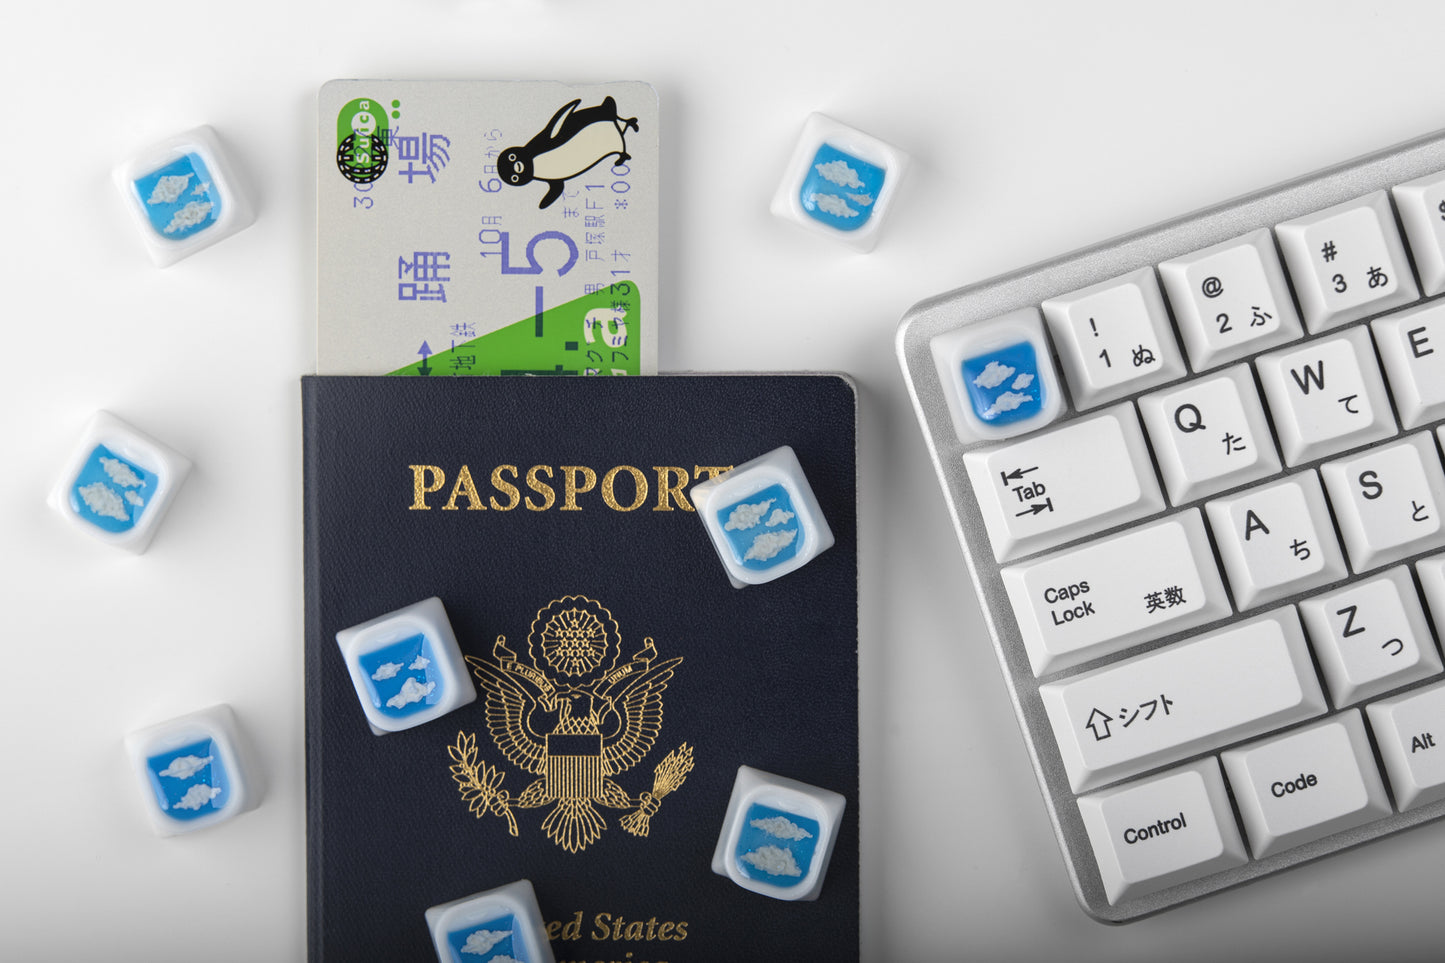 Airplane window keycaps shown on top of a passport and keyboard to the right